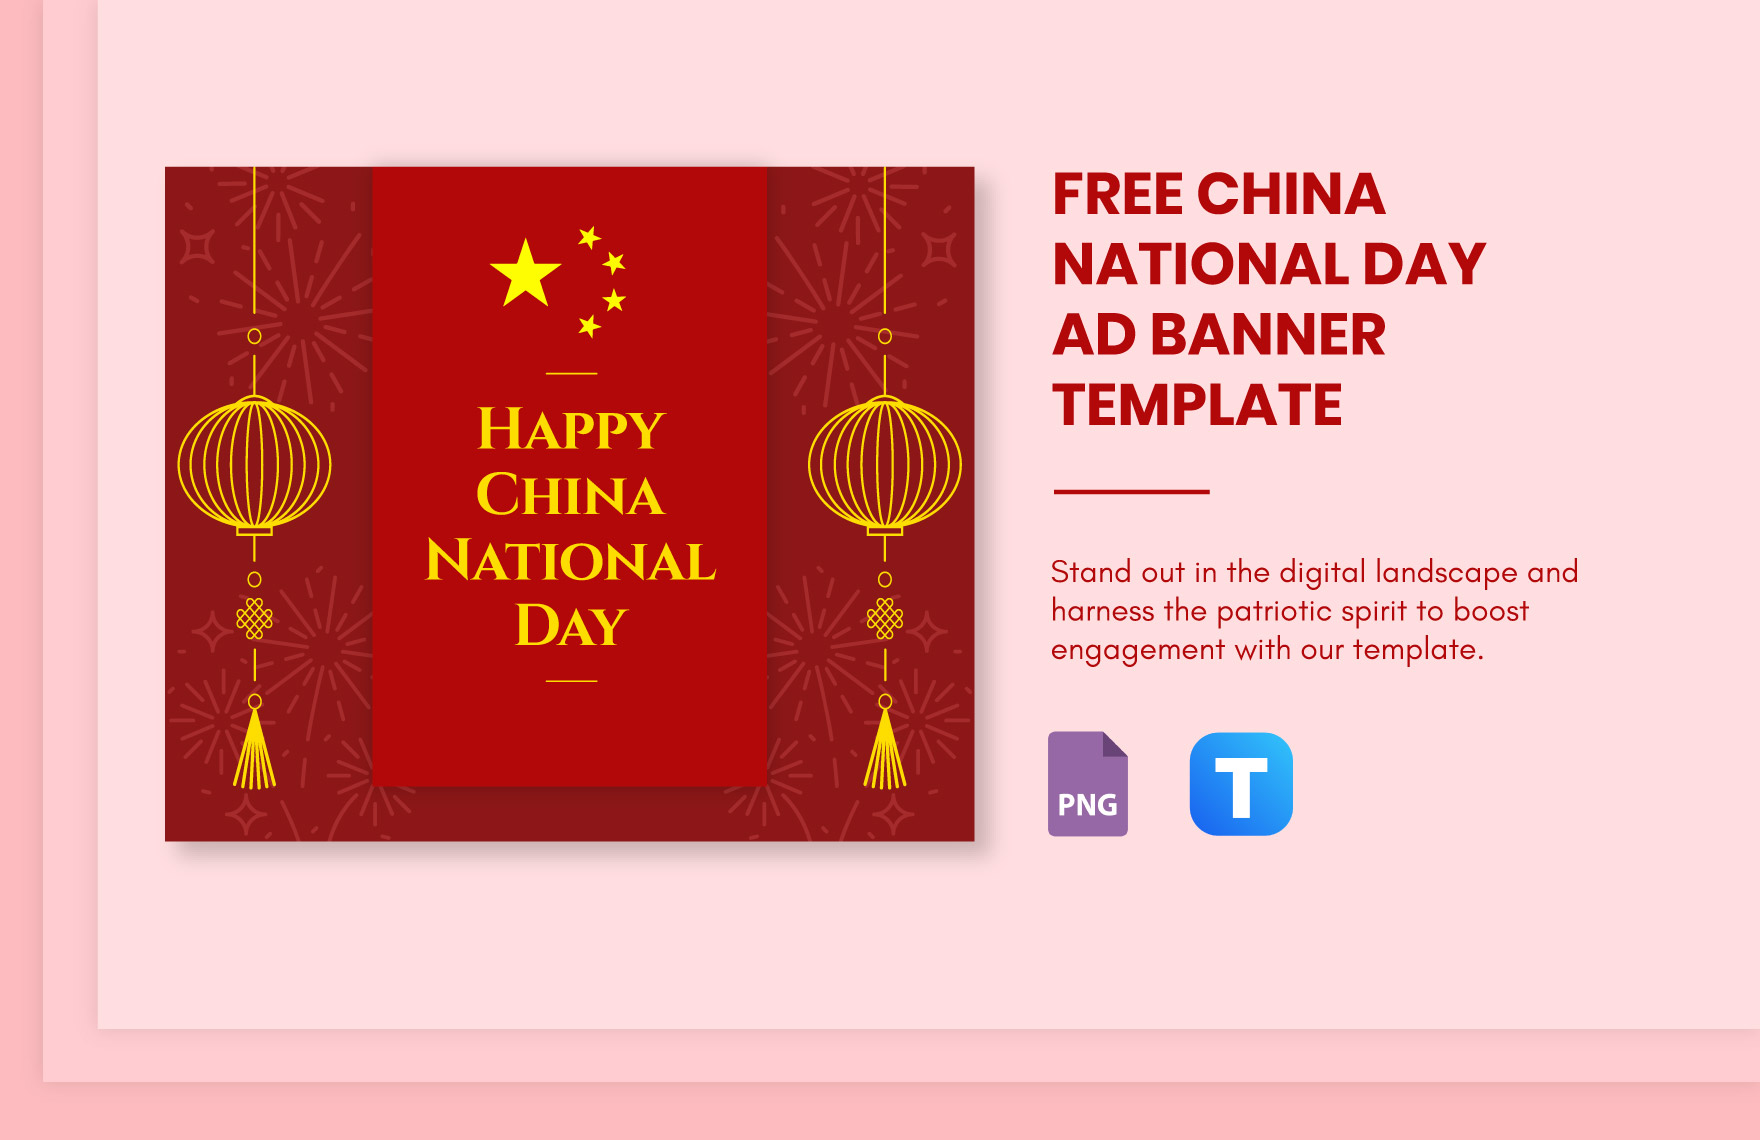 Free China National Day Ad Banner Template in PNG